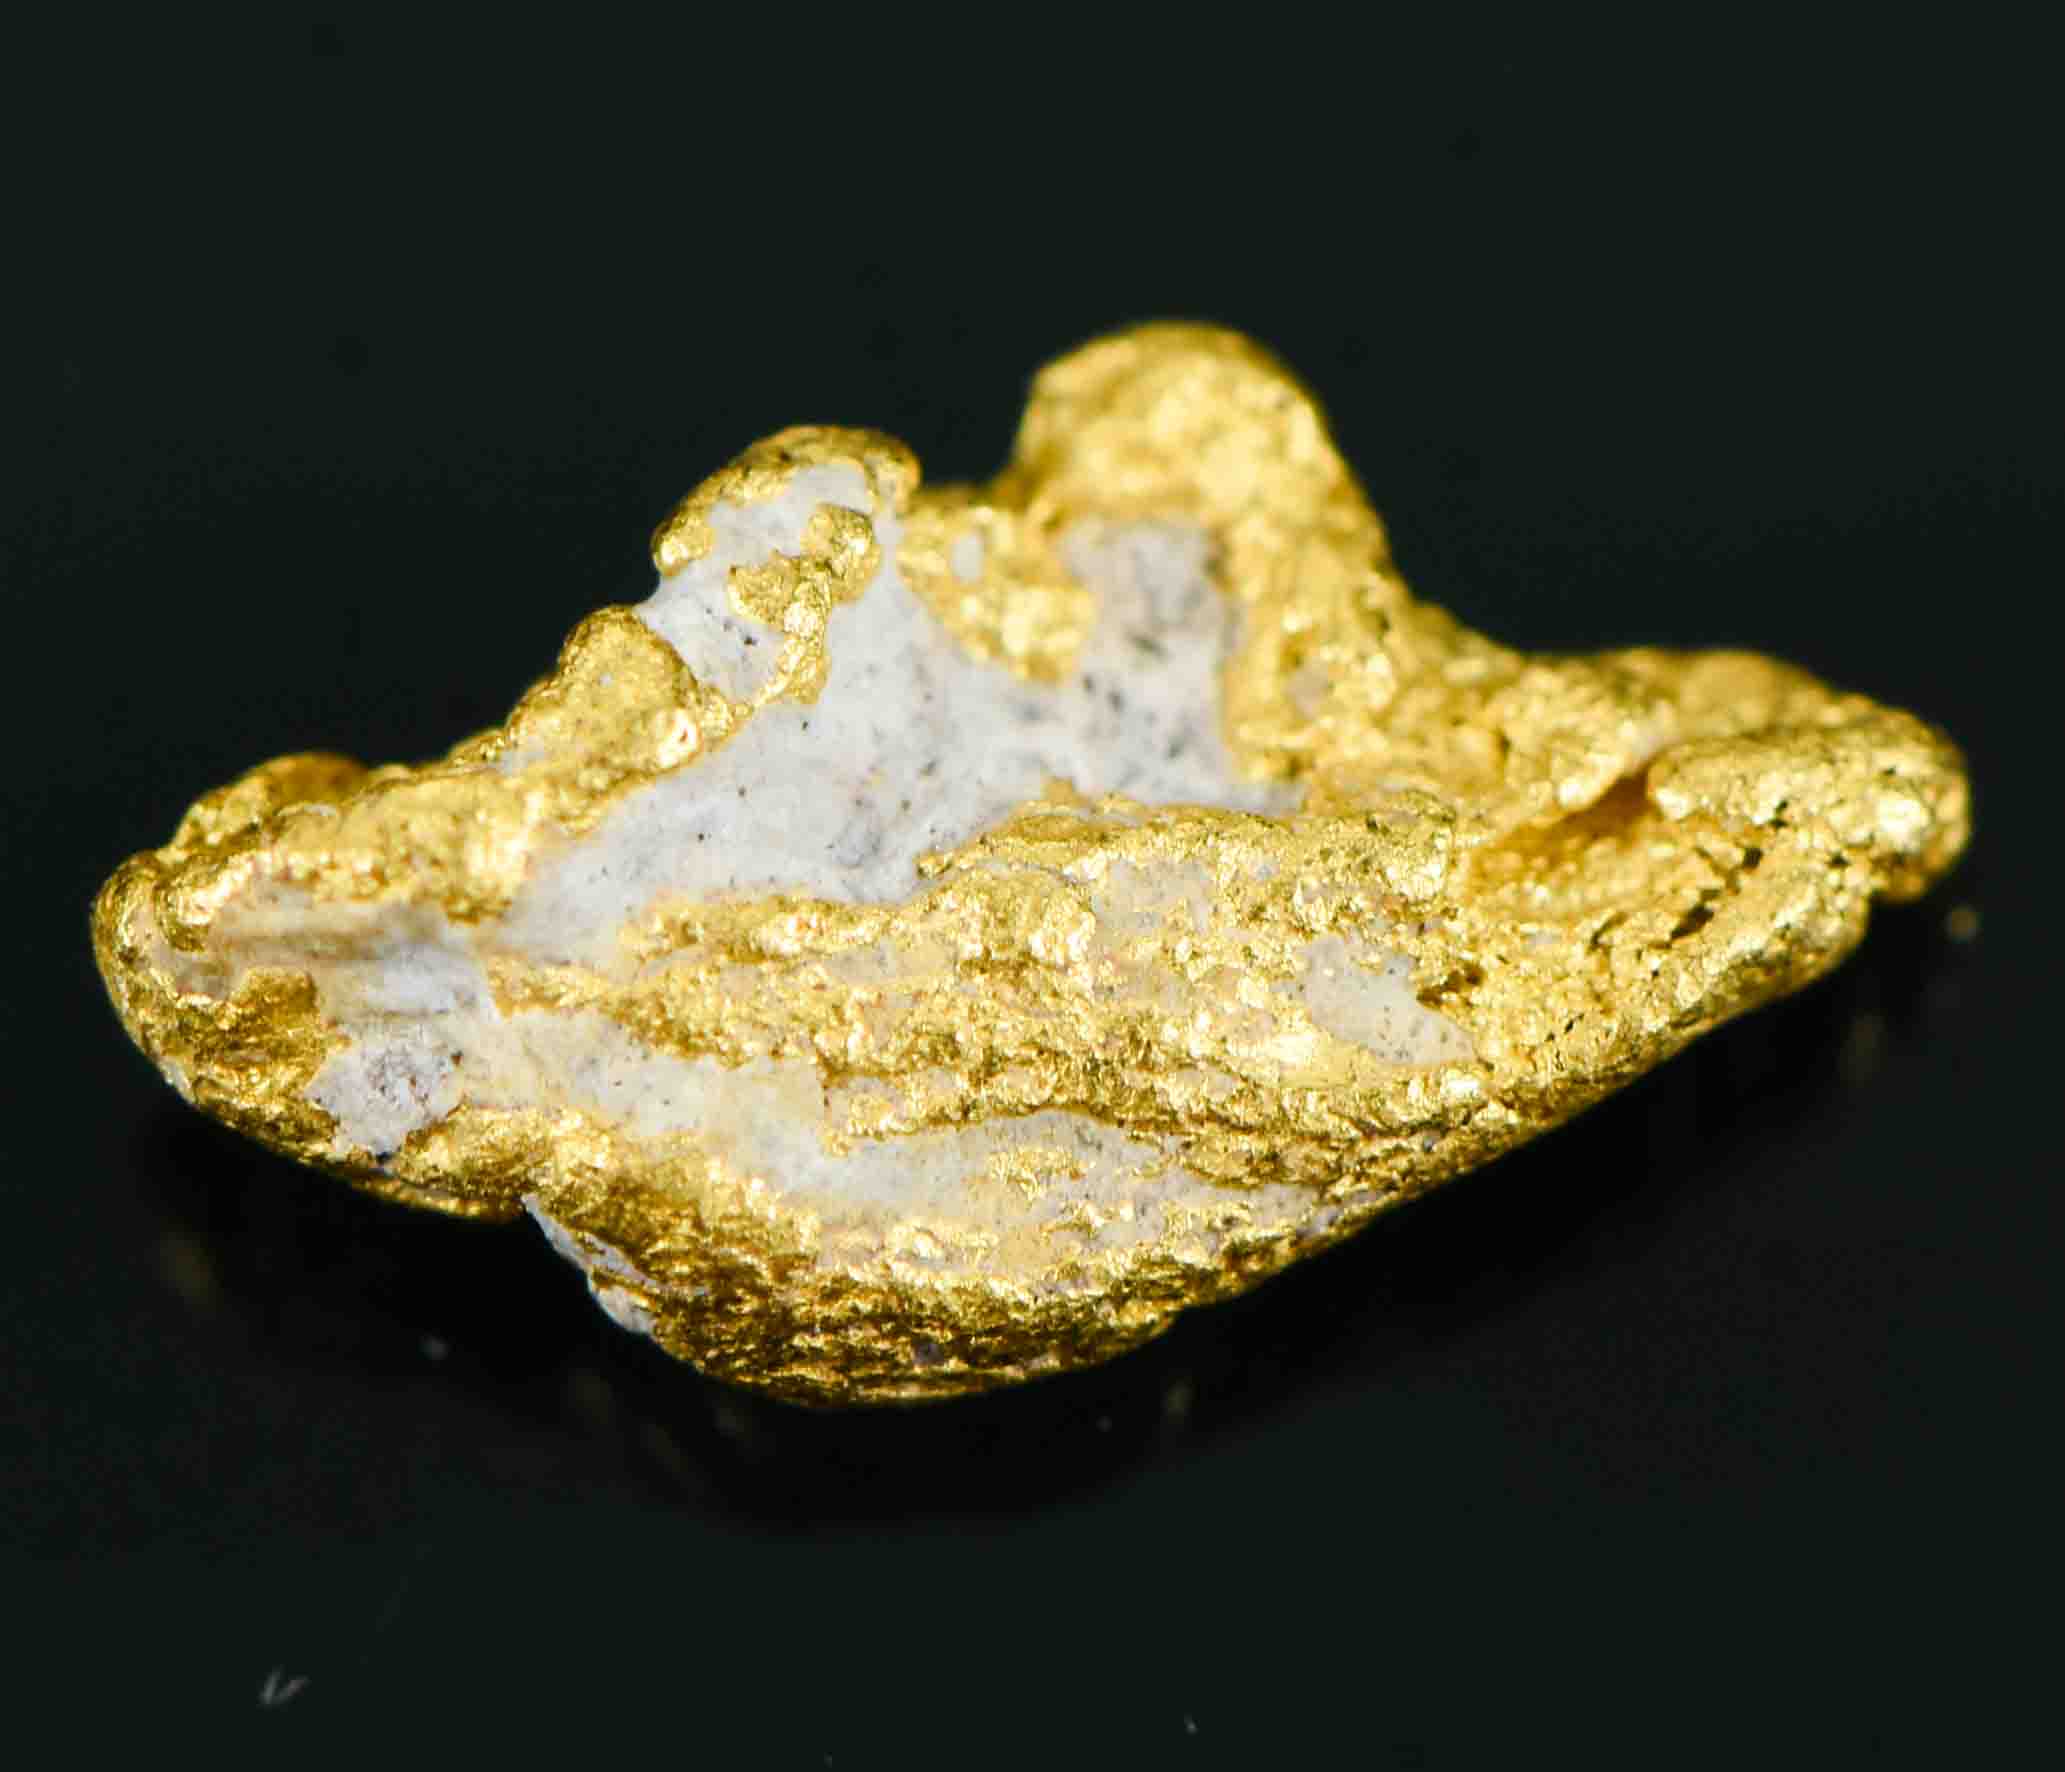 #2 Australian Natural Gold Nugget With Quartz Weighs .79 Grams.